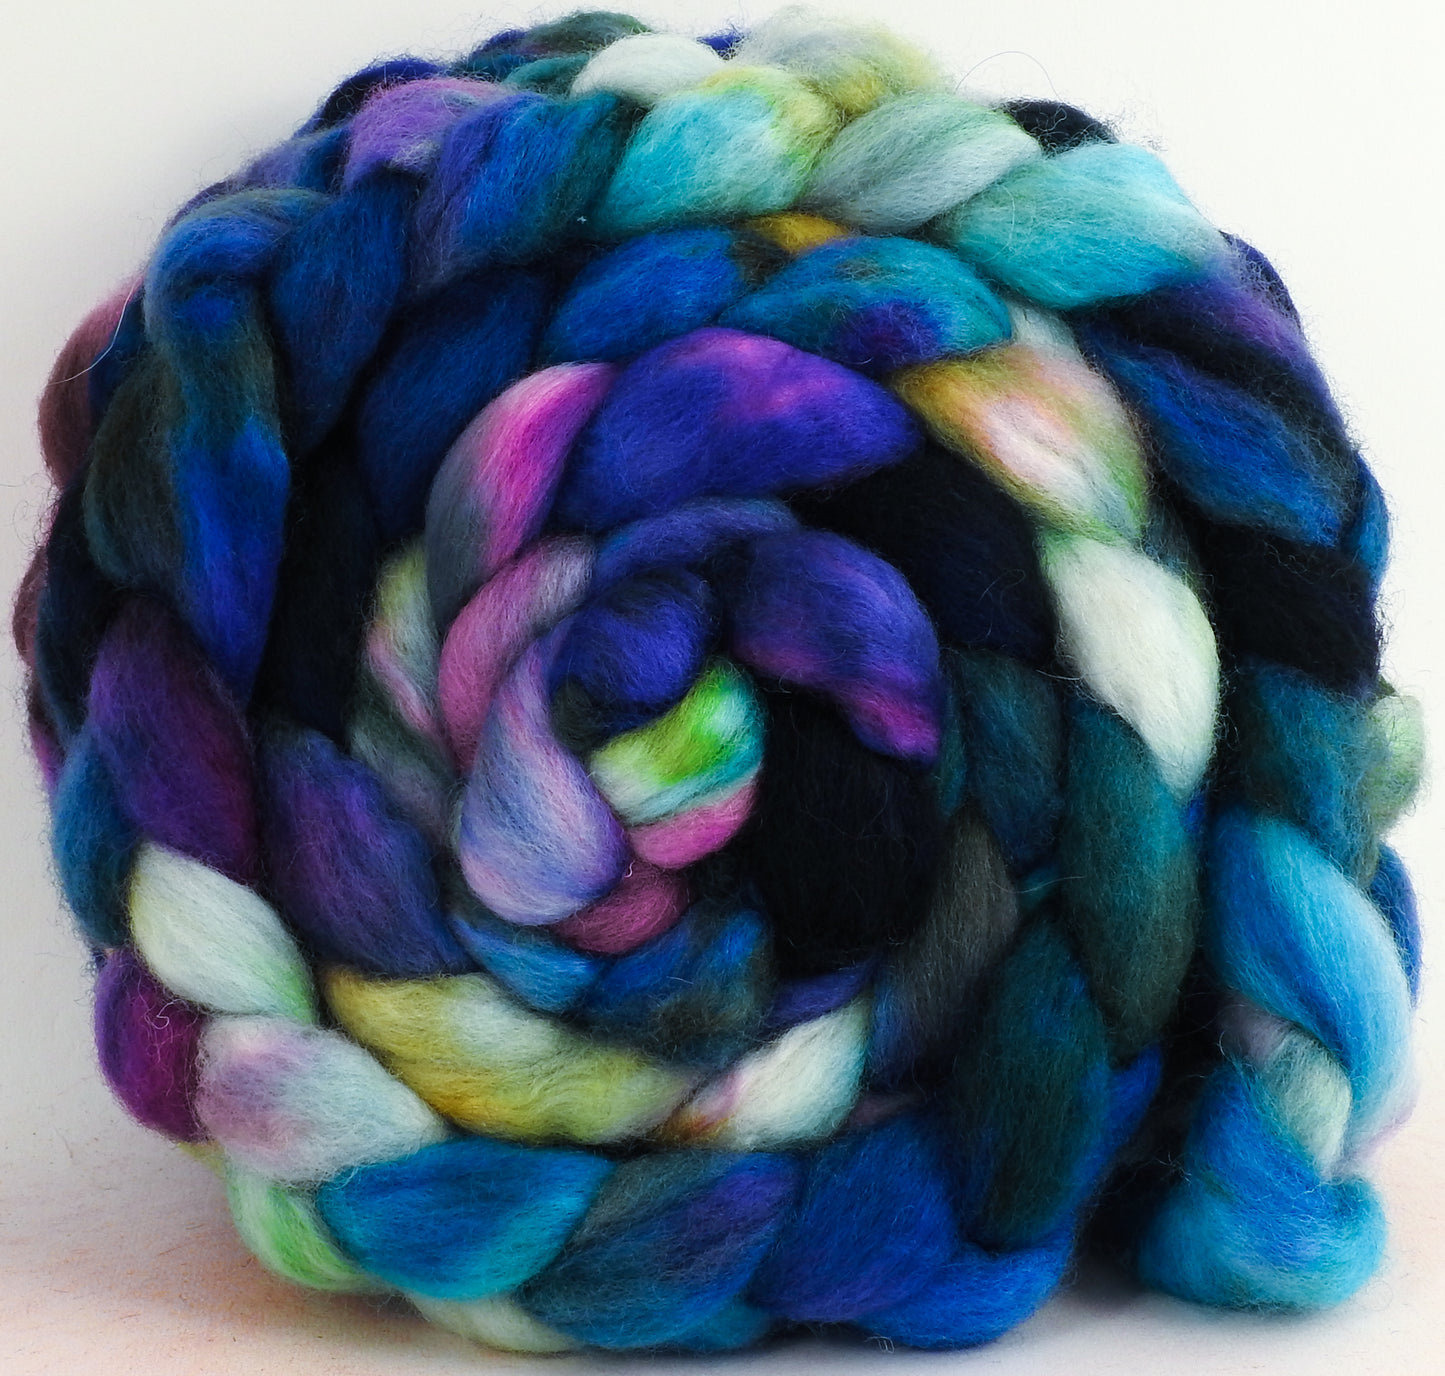 Mind Palace (5.6 oz) - Blue-faced Leicester/ Mohair (70/30)- Fusion Series